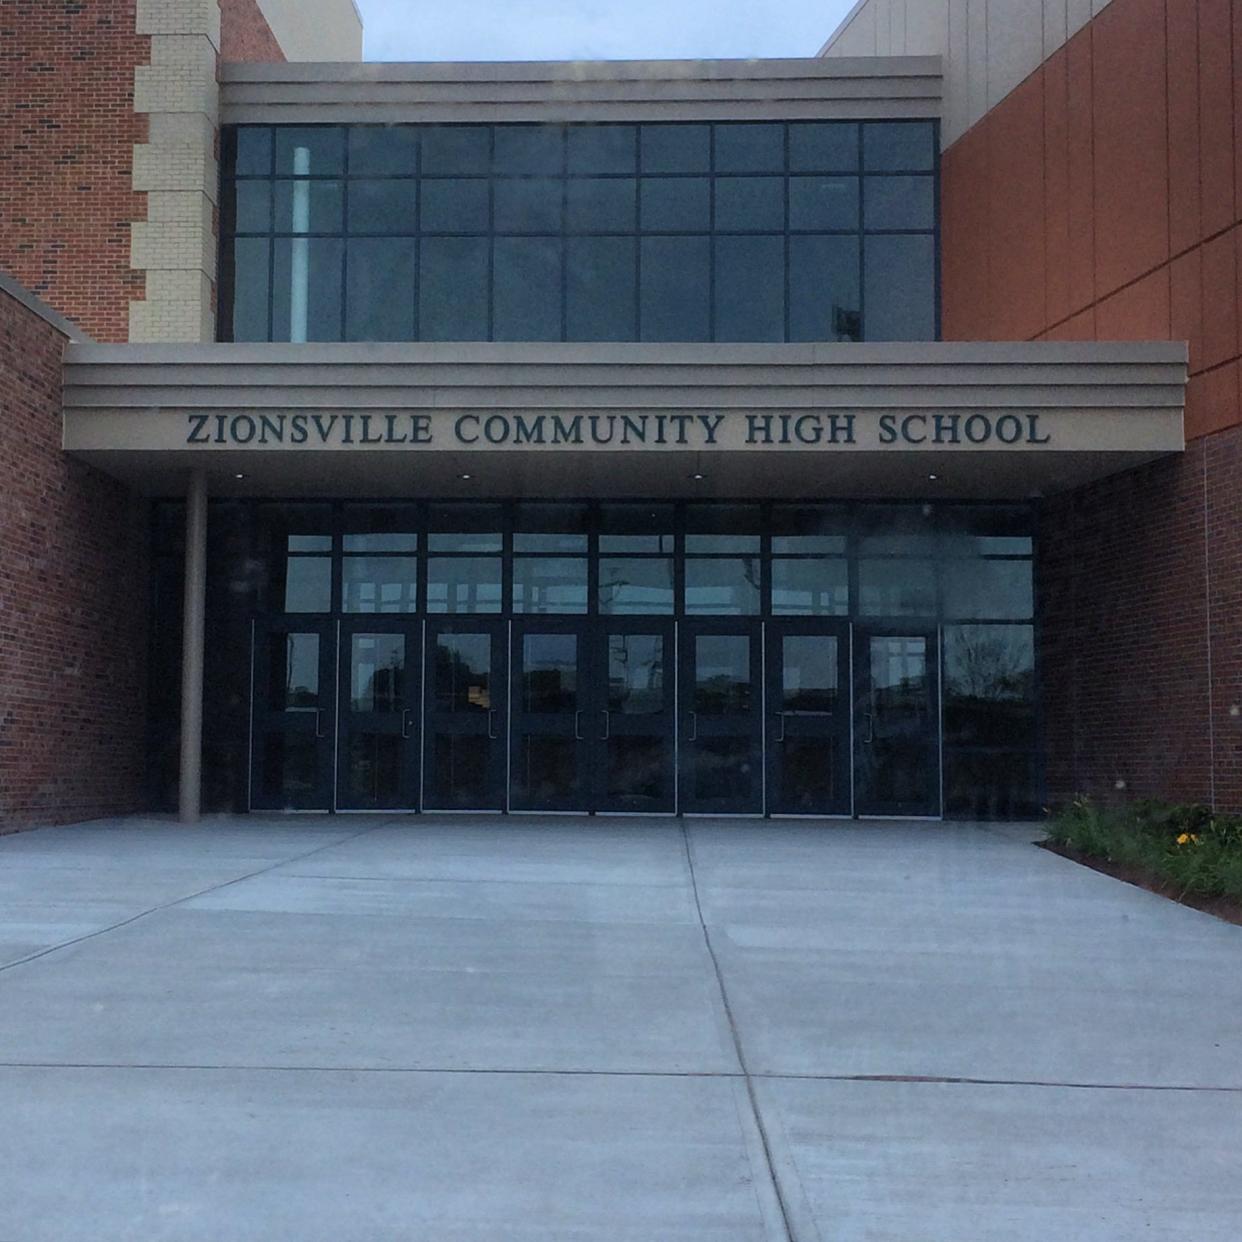 The exterior of Zionsville Community High School.